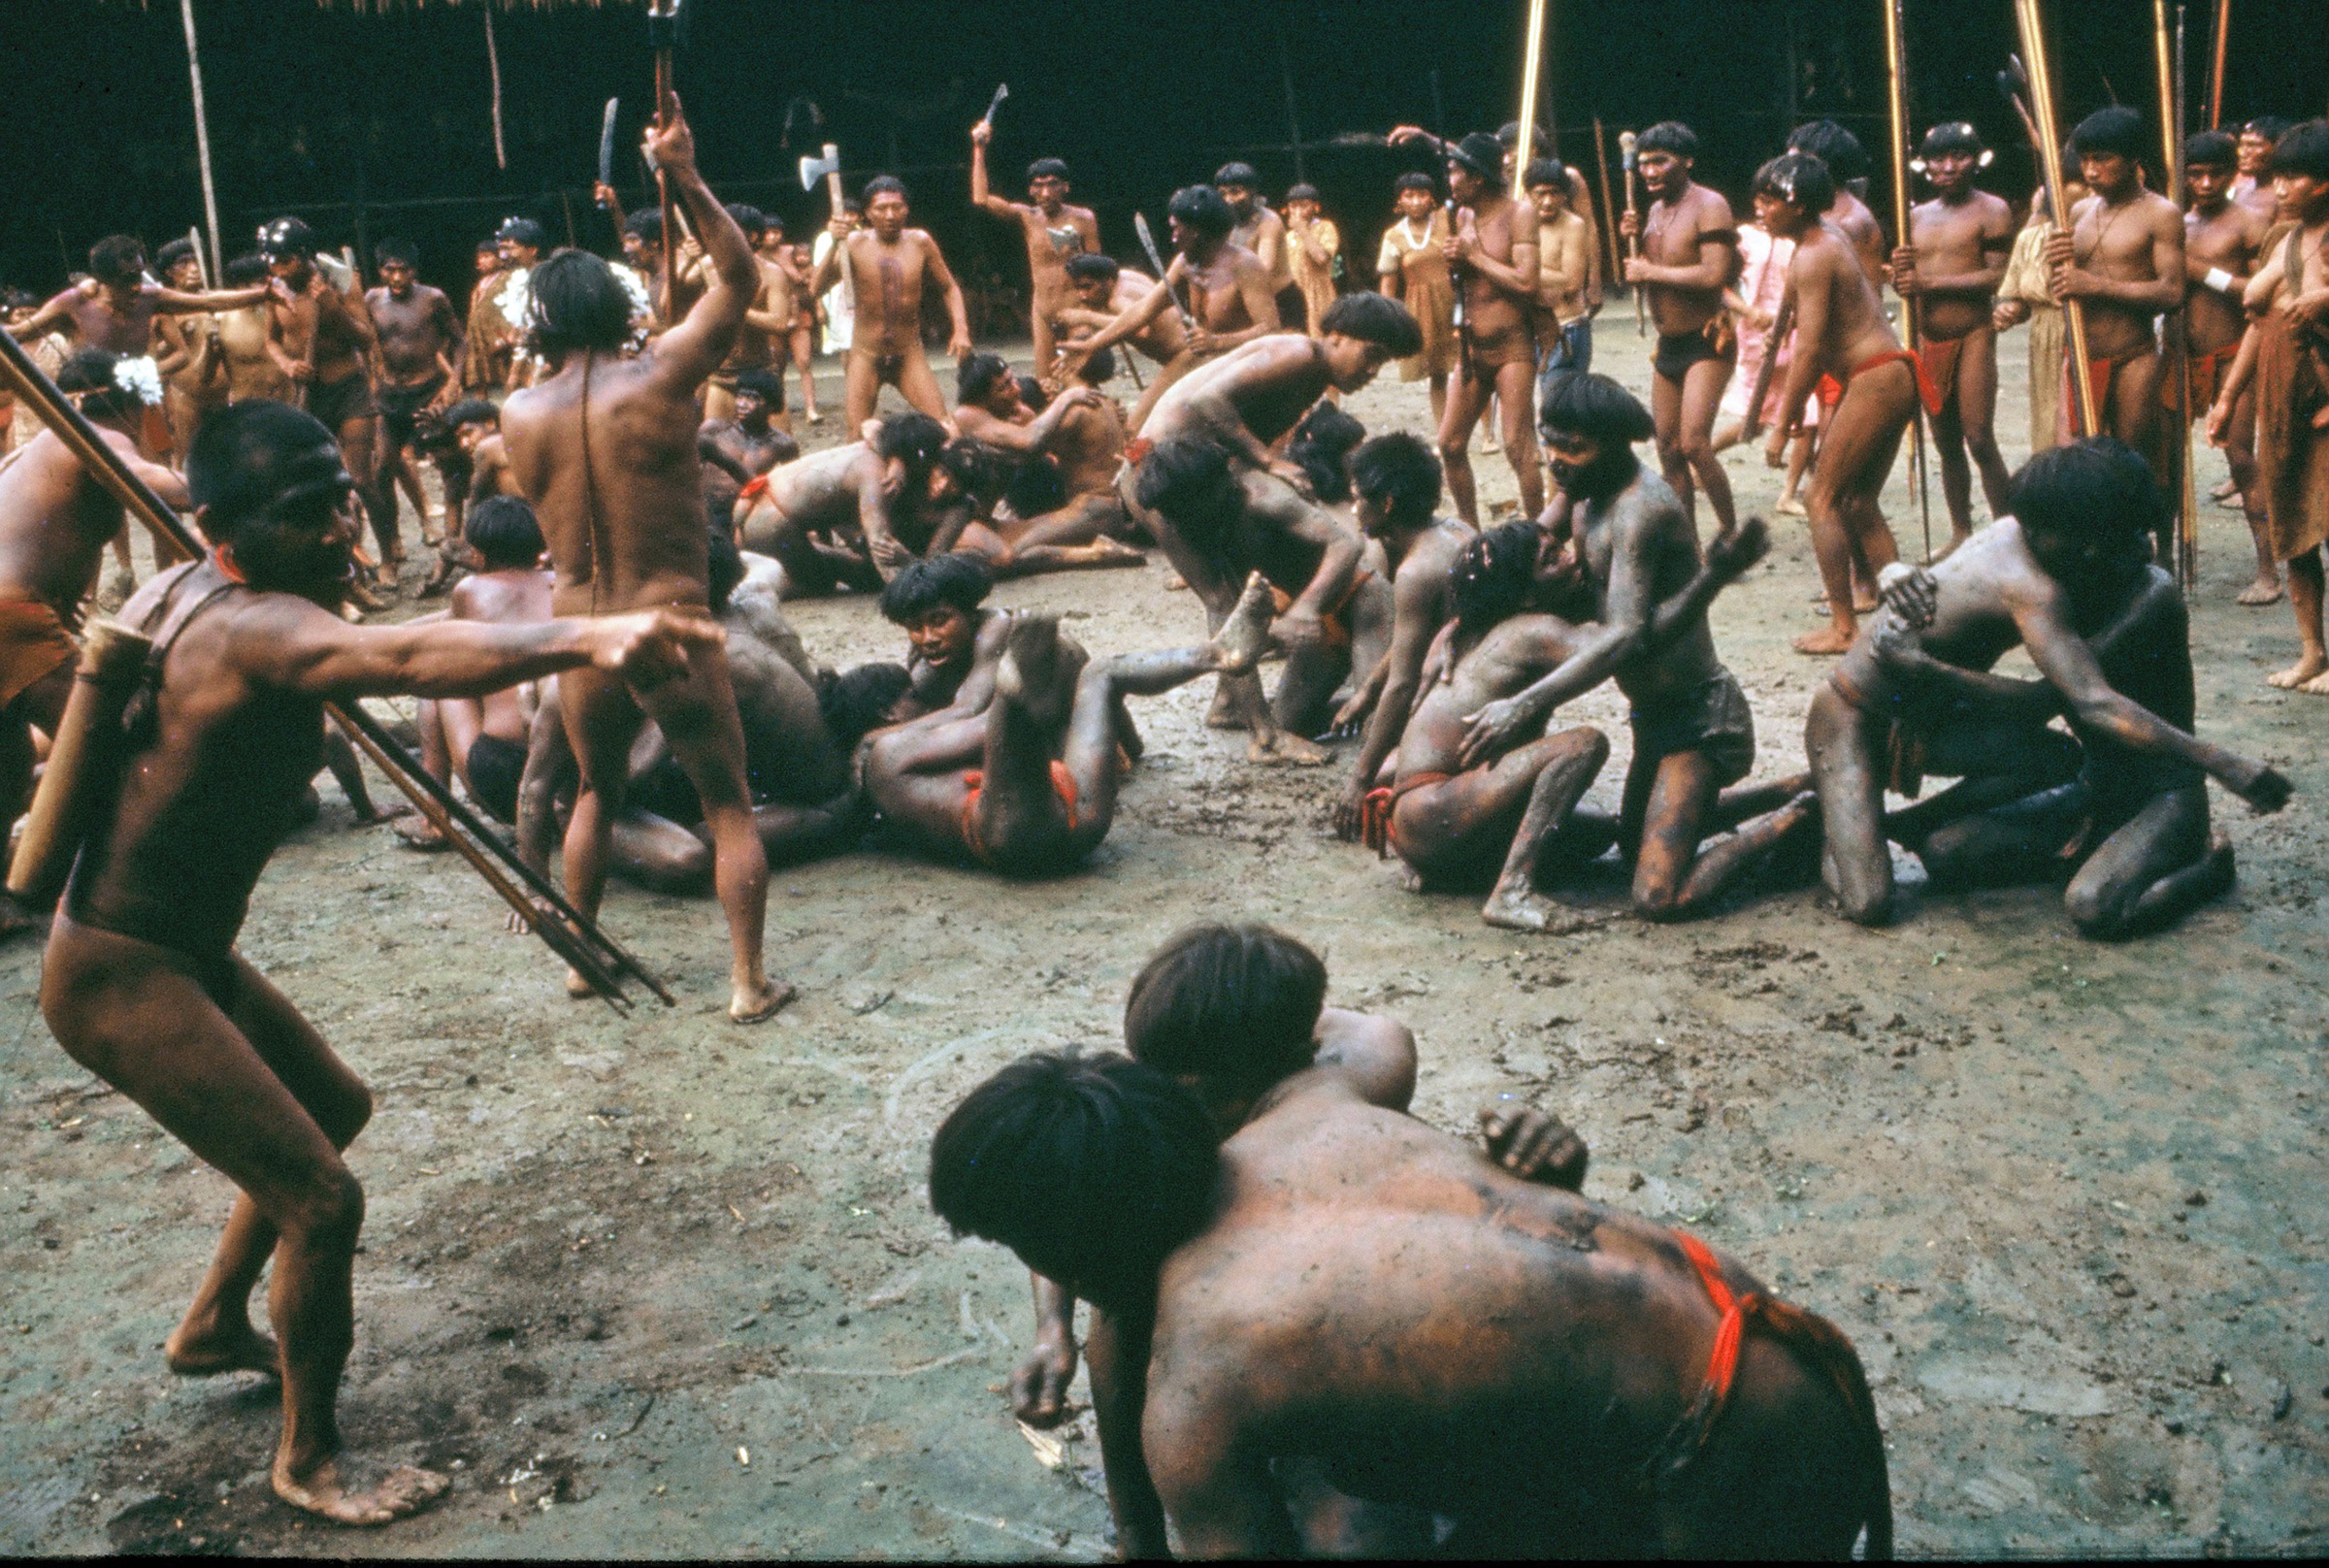 In this mid-1960s photo, men from two Yanomamö villages in the Amazon engage in nonhostile combat to determine the strength and fighting prowess of potential alliance partners. A new study from the University of Utah and University of Missouri indicates the  Yanomamö – who engaged in killing to gain status in past decades – often formed alliances with men in different villages when they attacked and killed people in other communities, then married their allies’ sisters or daughters. The idea is they fought like a “band of brothers-in-law” more than a closely related “band of brothers,” fathers and sons from a single community.